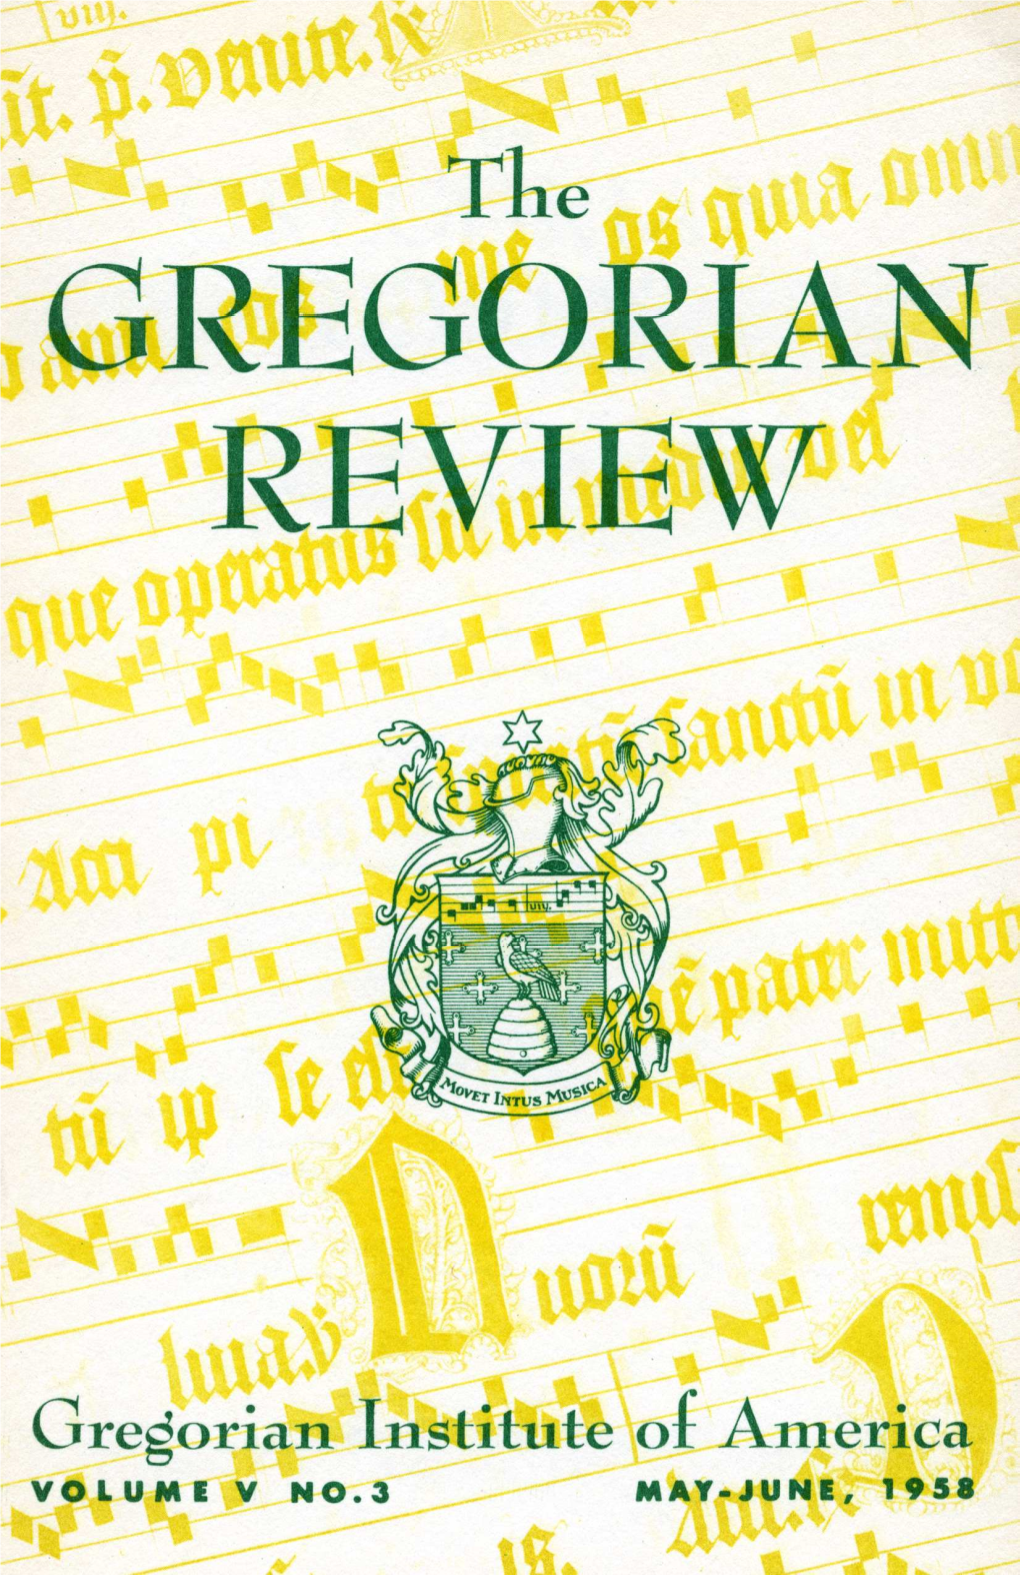 The GREGORIAN REVIEW